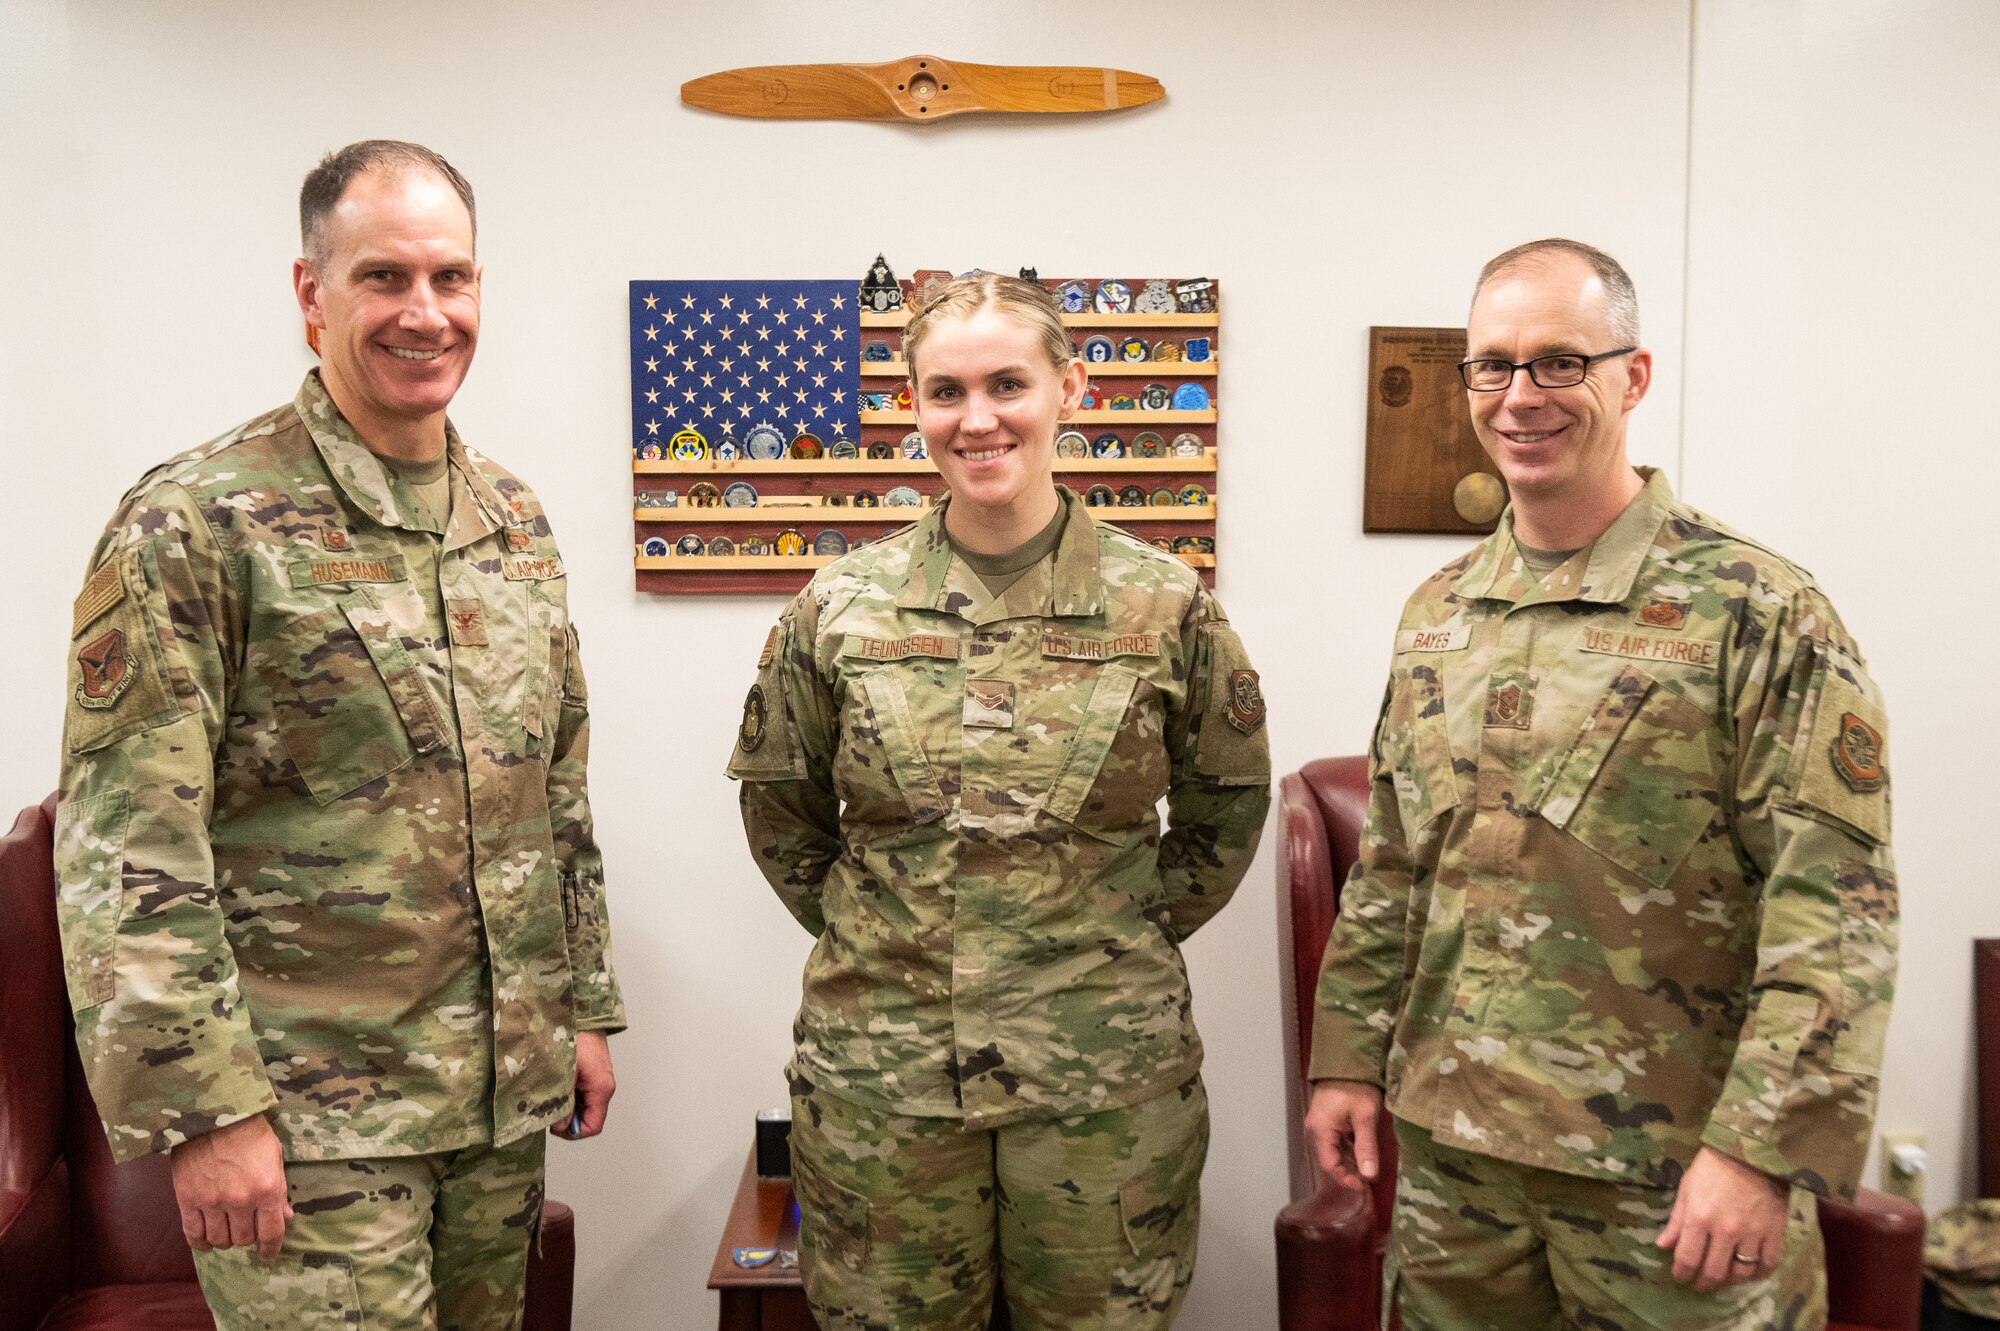 Col. Matt Husemann, left, 436th Airlift Wing commander, and Chief Master Sgt. Timothy Bayes, right, 436th AW command chief, stand with Airman 1st Class Shayna Teunissen, 436th Comptroller squadron budget analyst, at Dover Air Force Base, Delaware, March 16, 2022. Teunissen accompanied Bayes as part of the Chief for the Day mentoring program, which offers Airmen a first-hand experience of the command chief’s typical work day. (U.S. Air Force photo by Mauricio Campino)